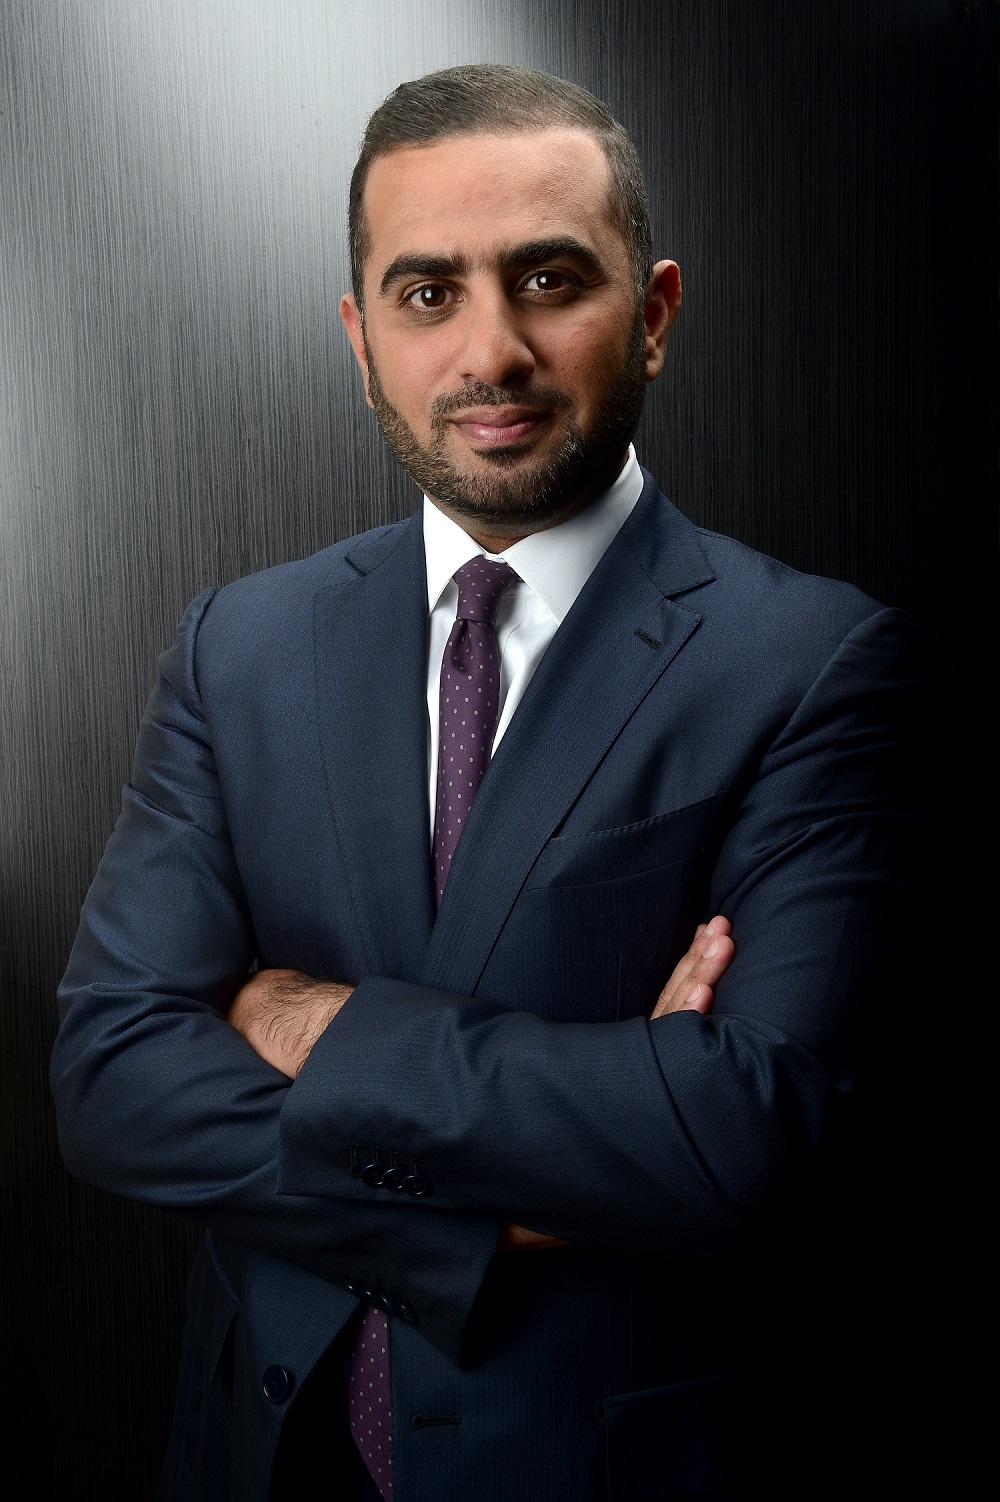 beIN MEDIA GROUP Chairman Appoints Yousef Al-Obaidly as Chief Executive Officer